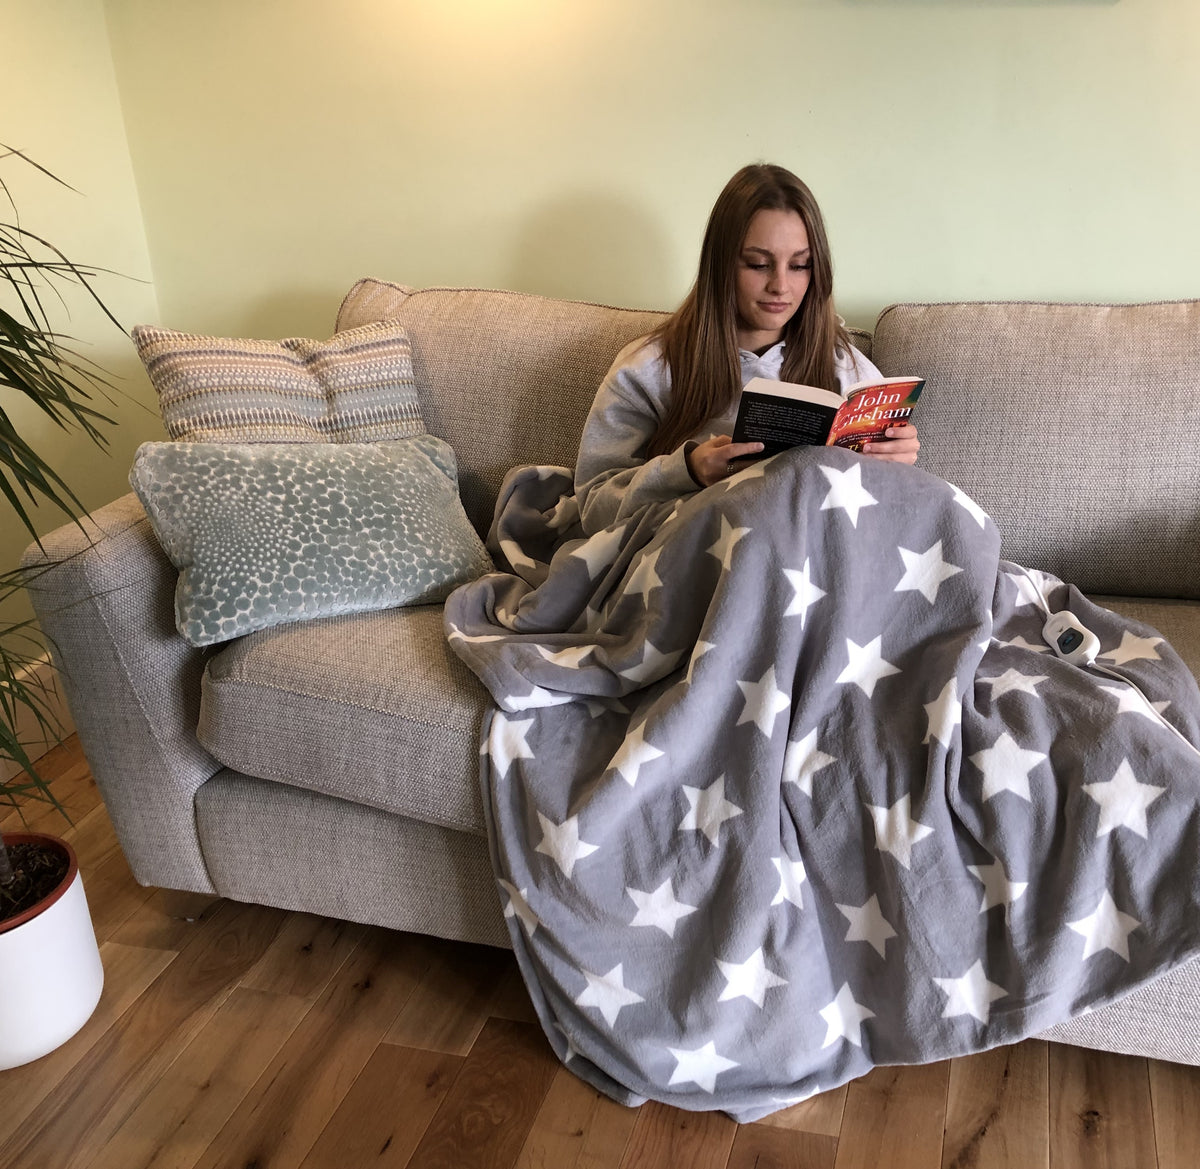 A girl on sofa with heated throw reading a book.